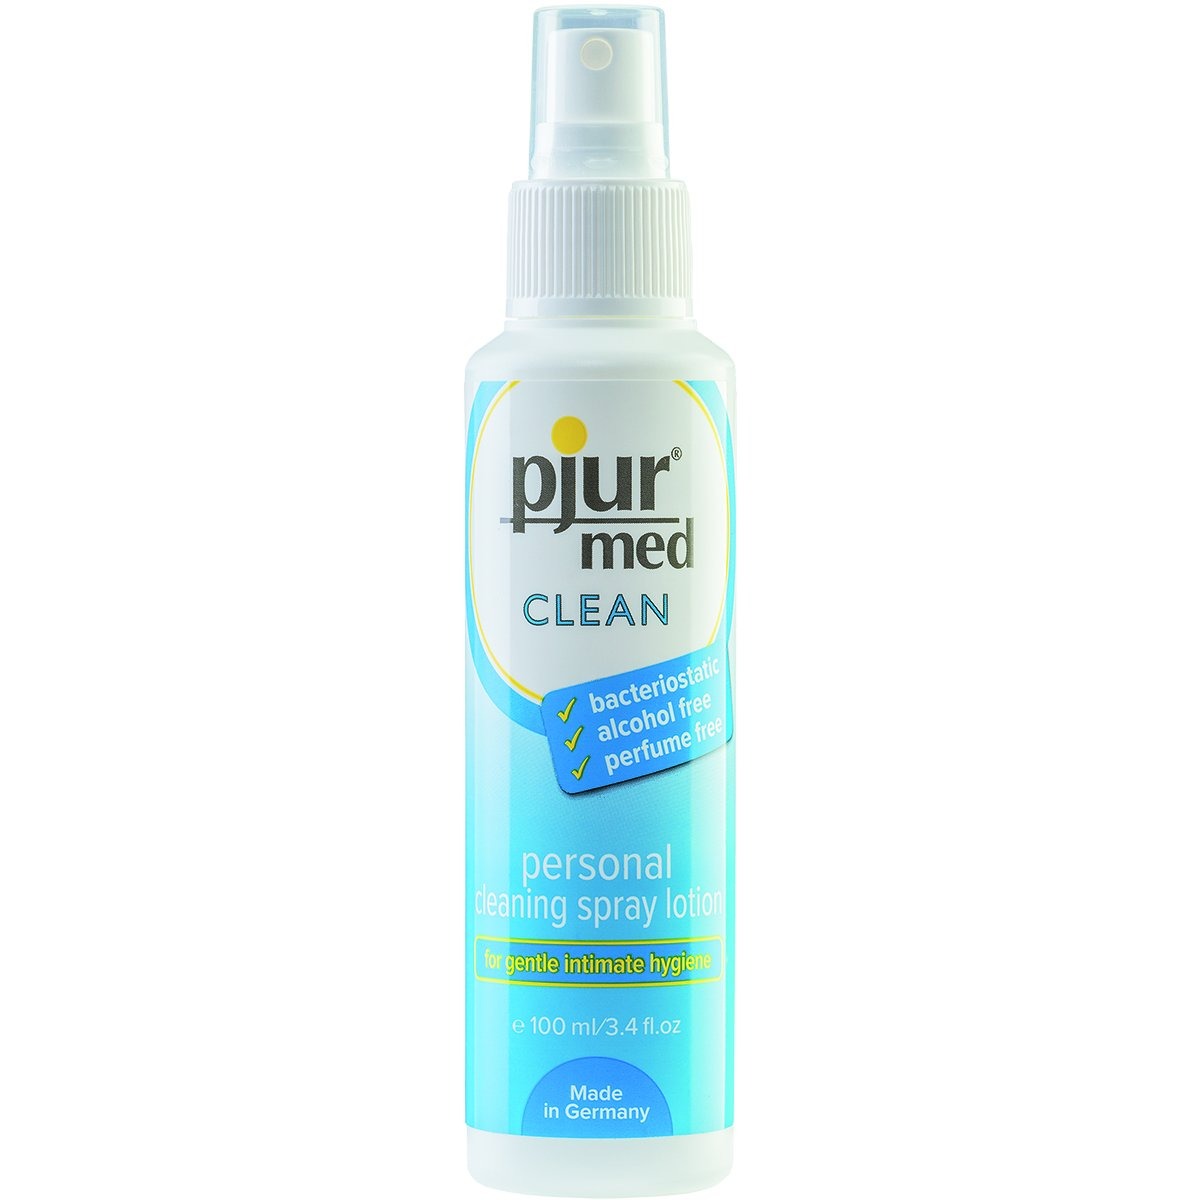 Pjur Med Clean Bottle - Buy At Luxury Toy X - Free 3-Day Shipping